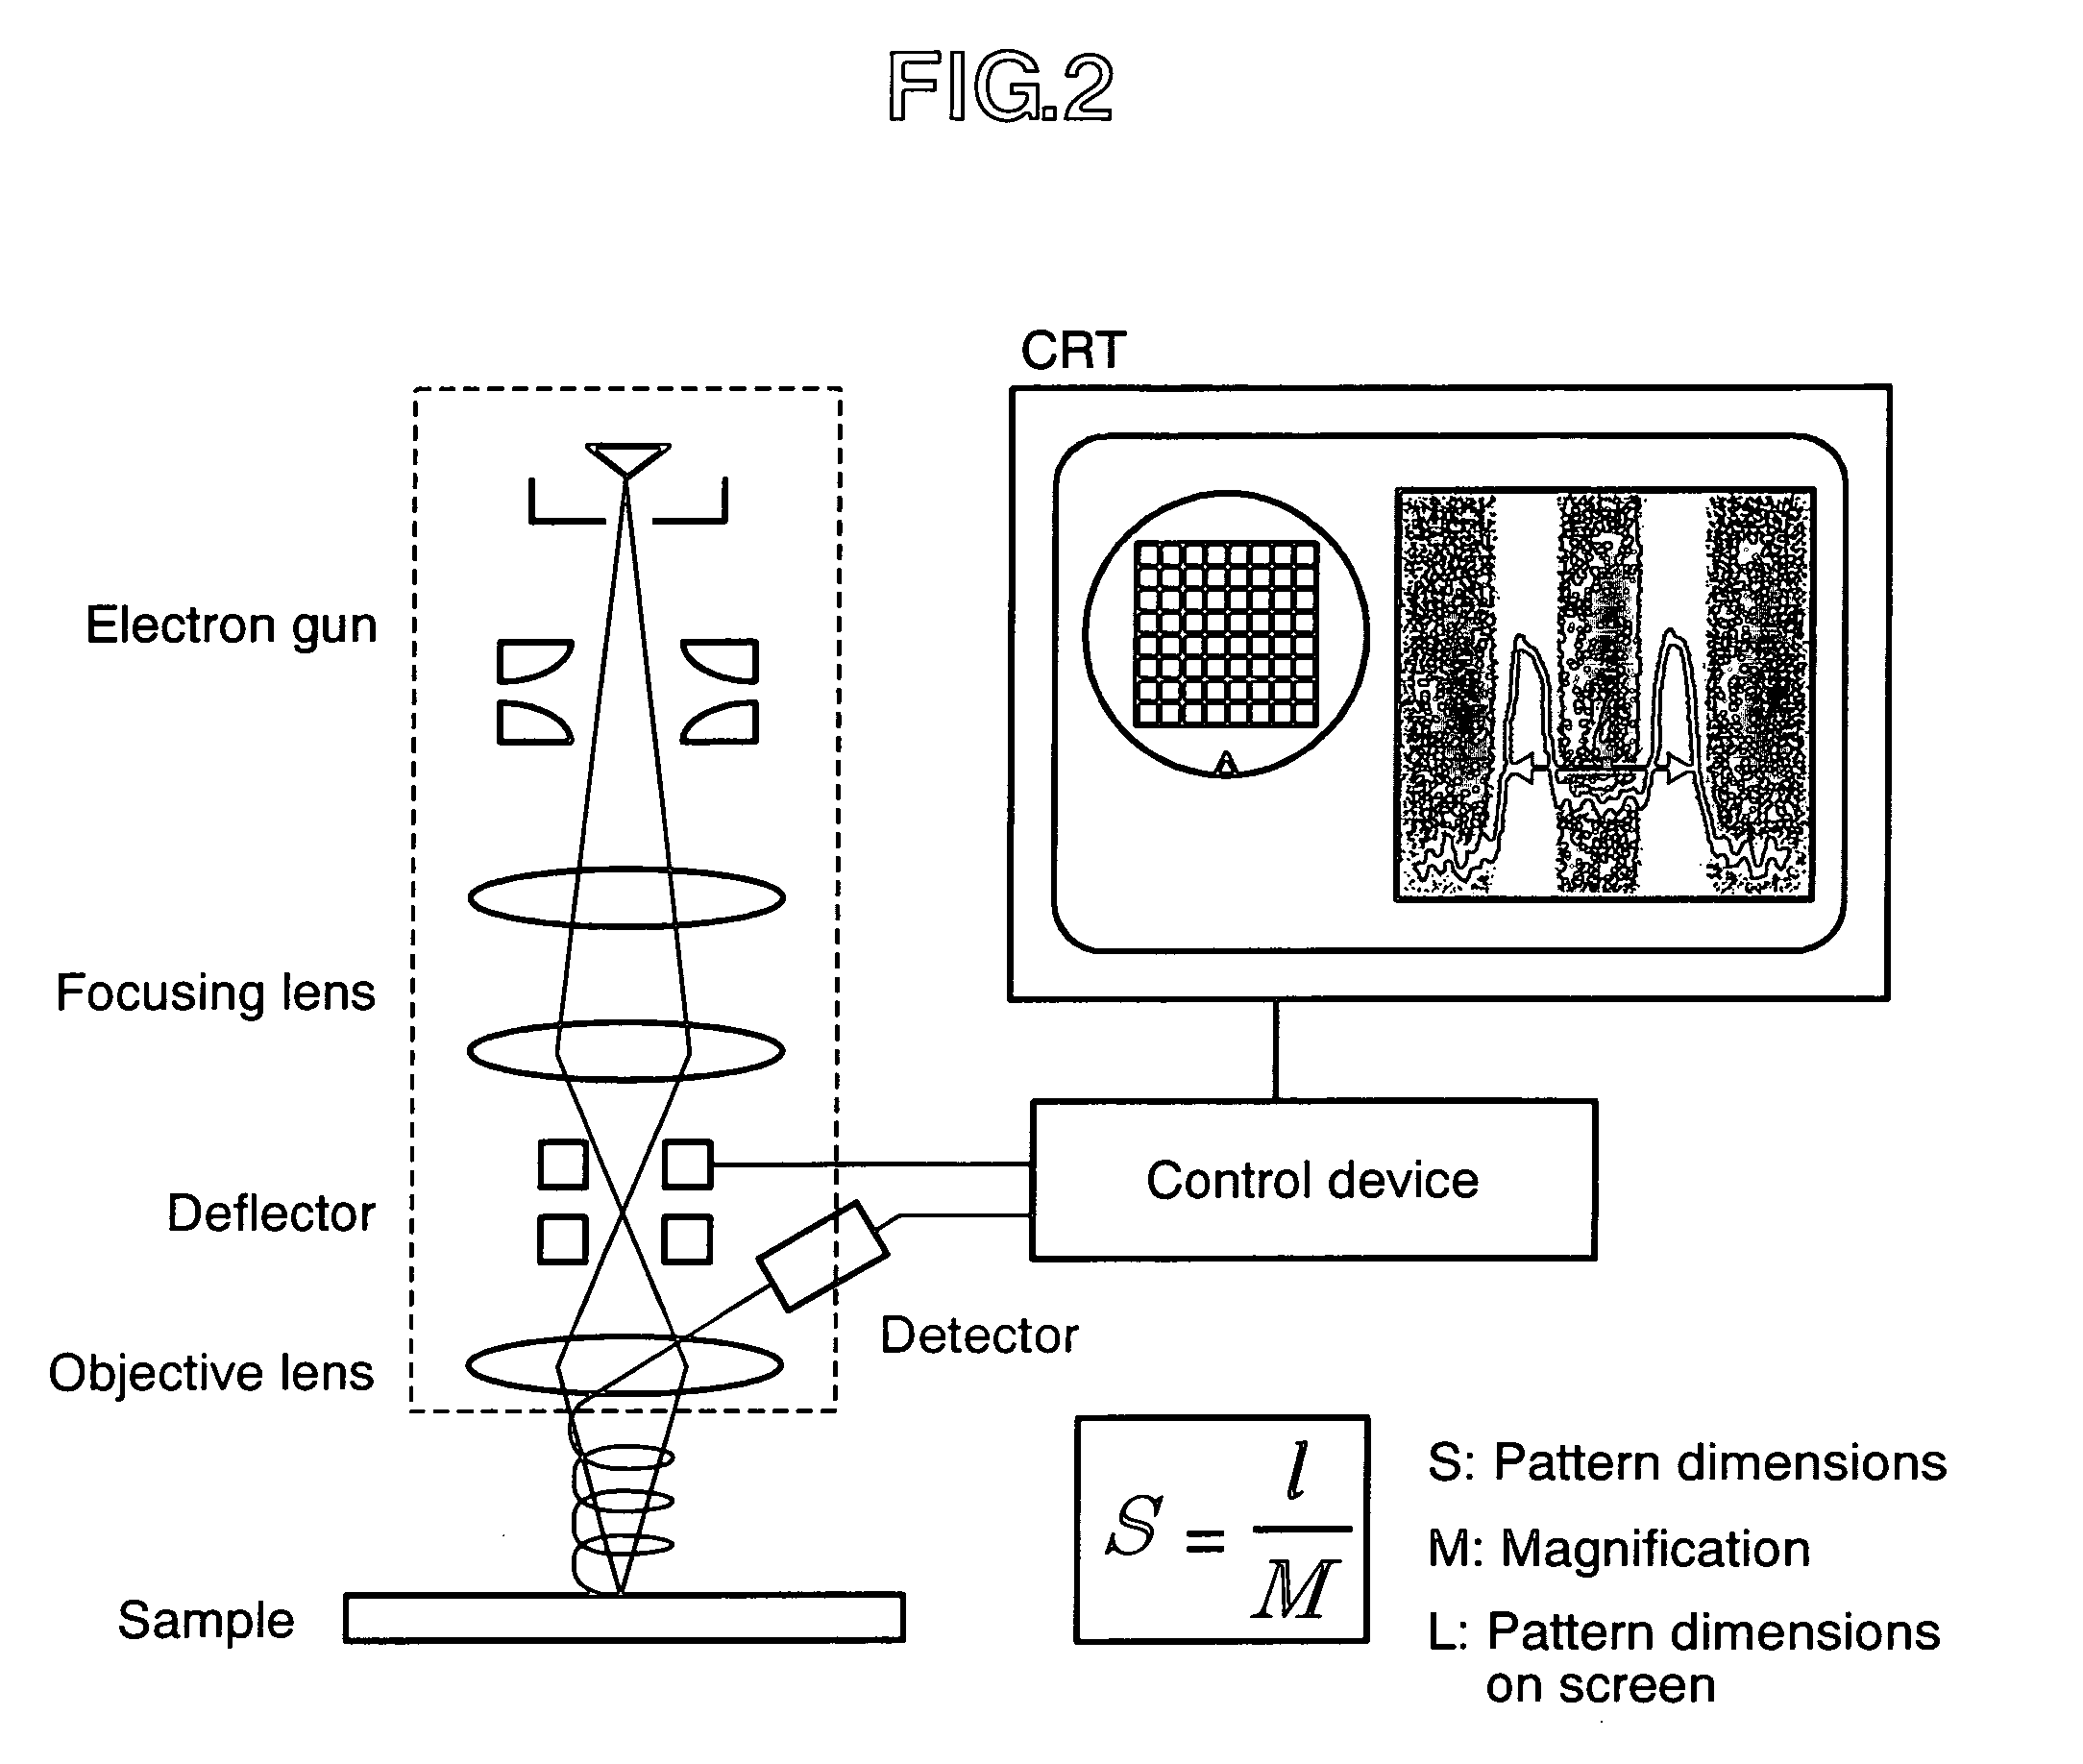 Charged particle beam apparatus and methods for capturing images using the same